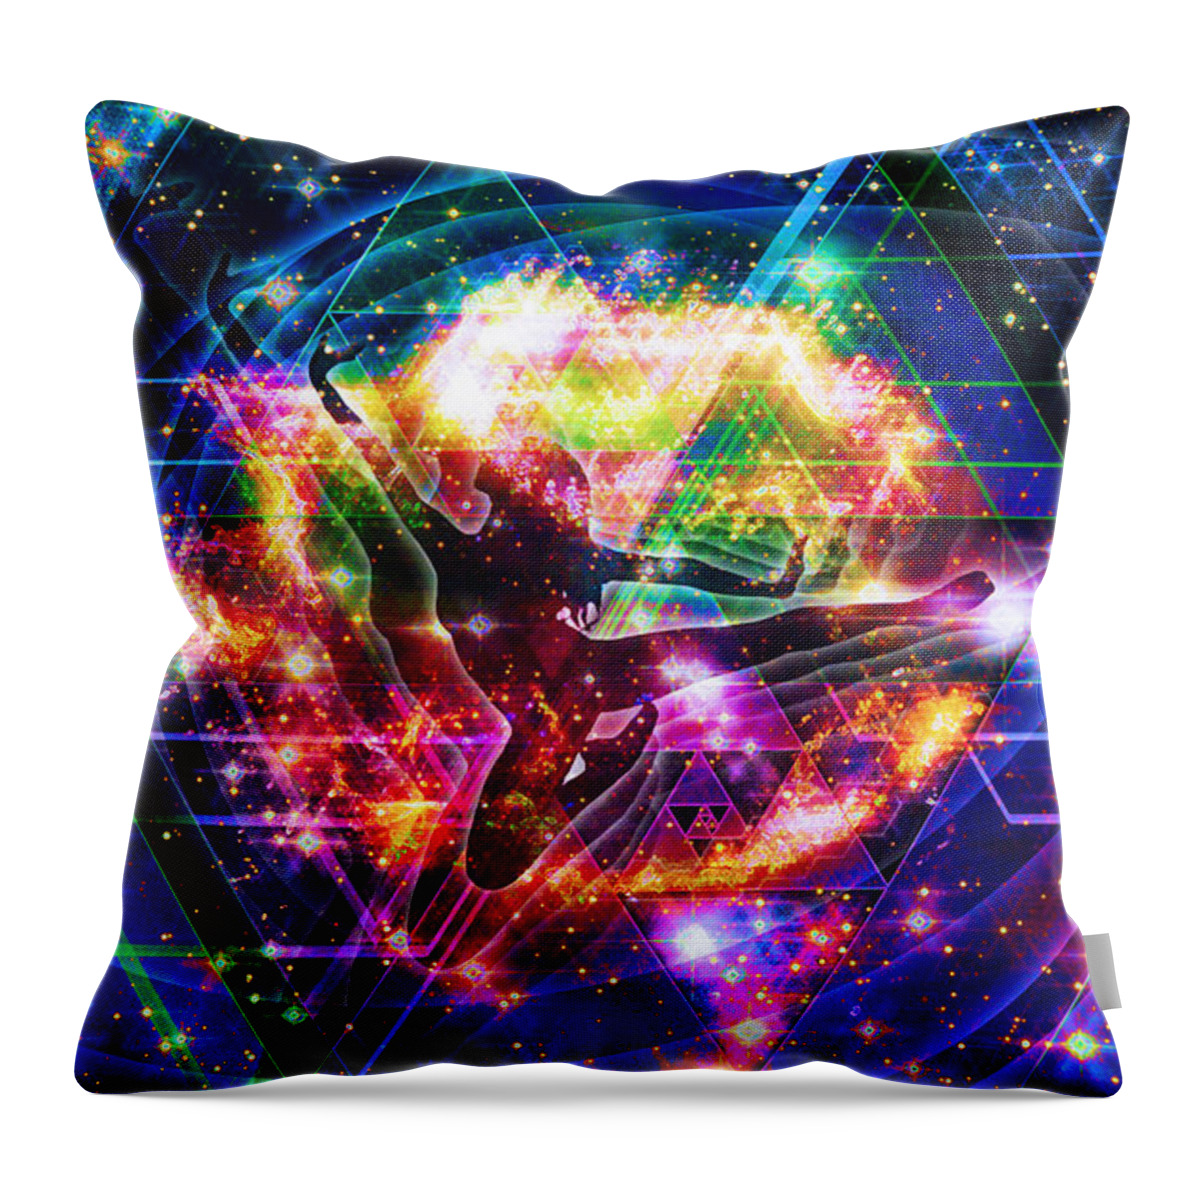 Cassiopeia Throw Pillow featuring the digital art The Beholder by Kenneth Armand Johnson